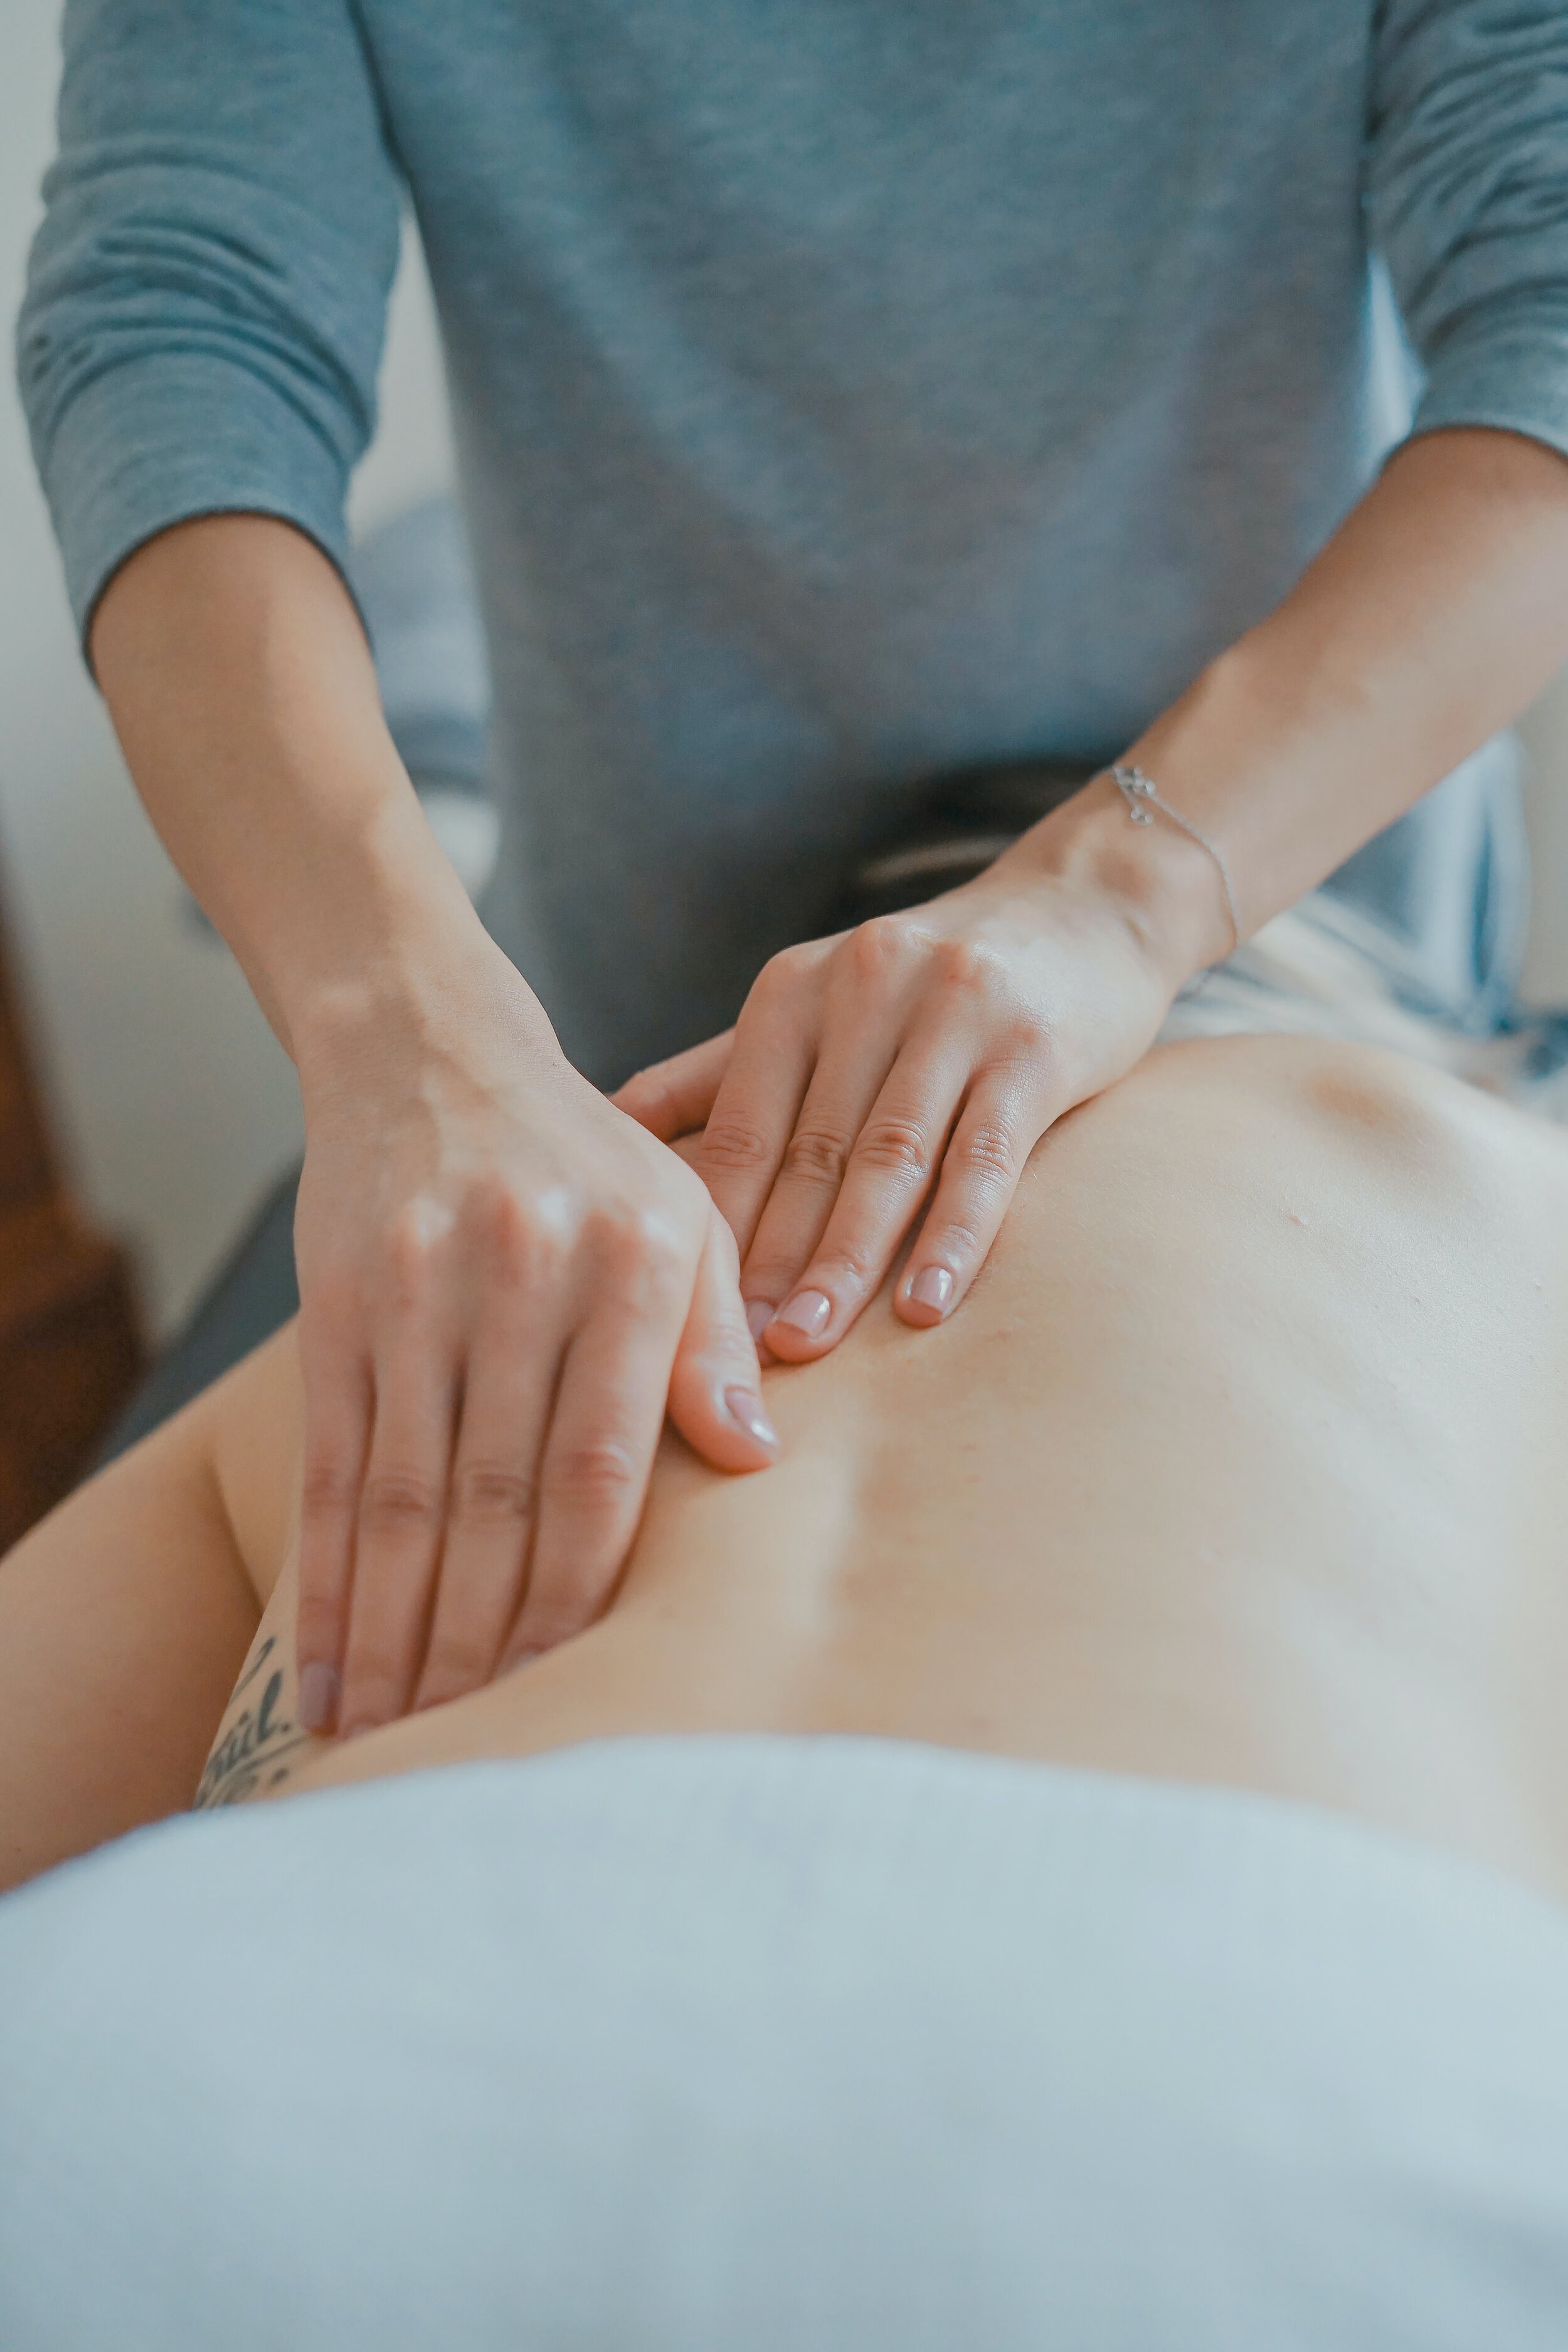 Can massage therapy help improve your health?